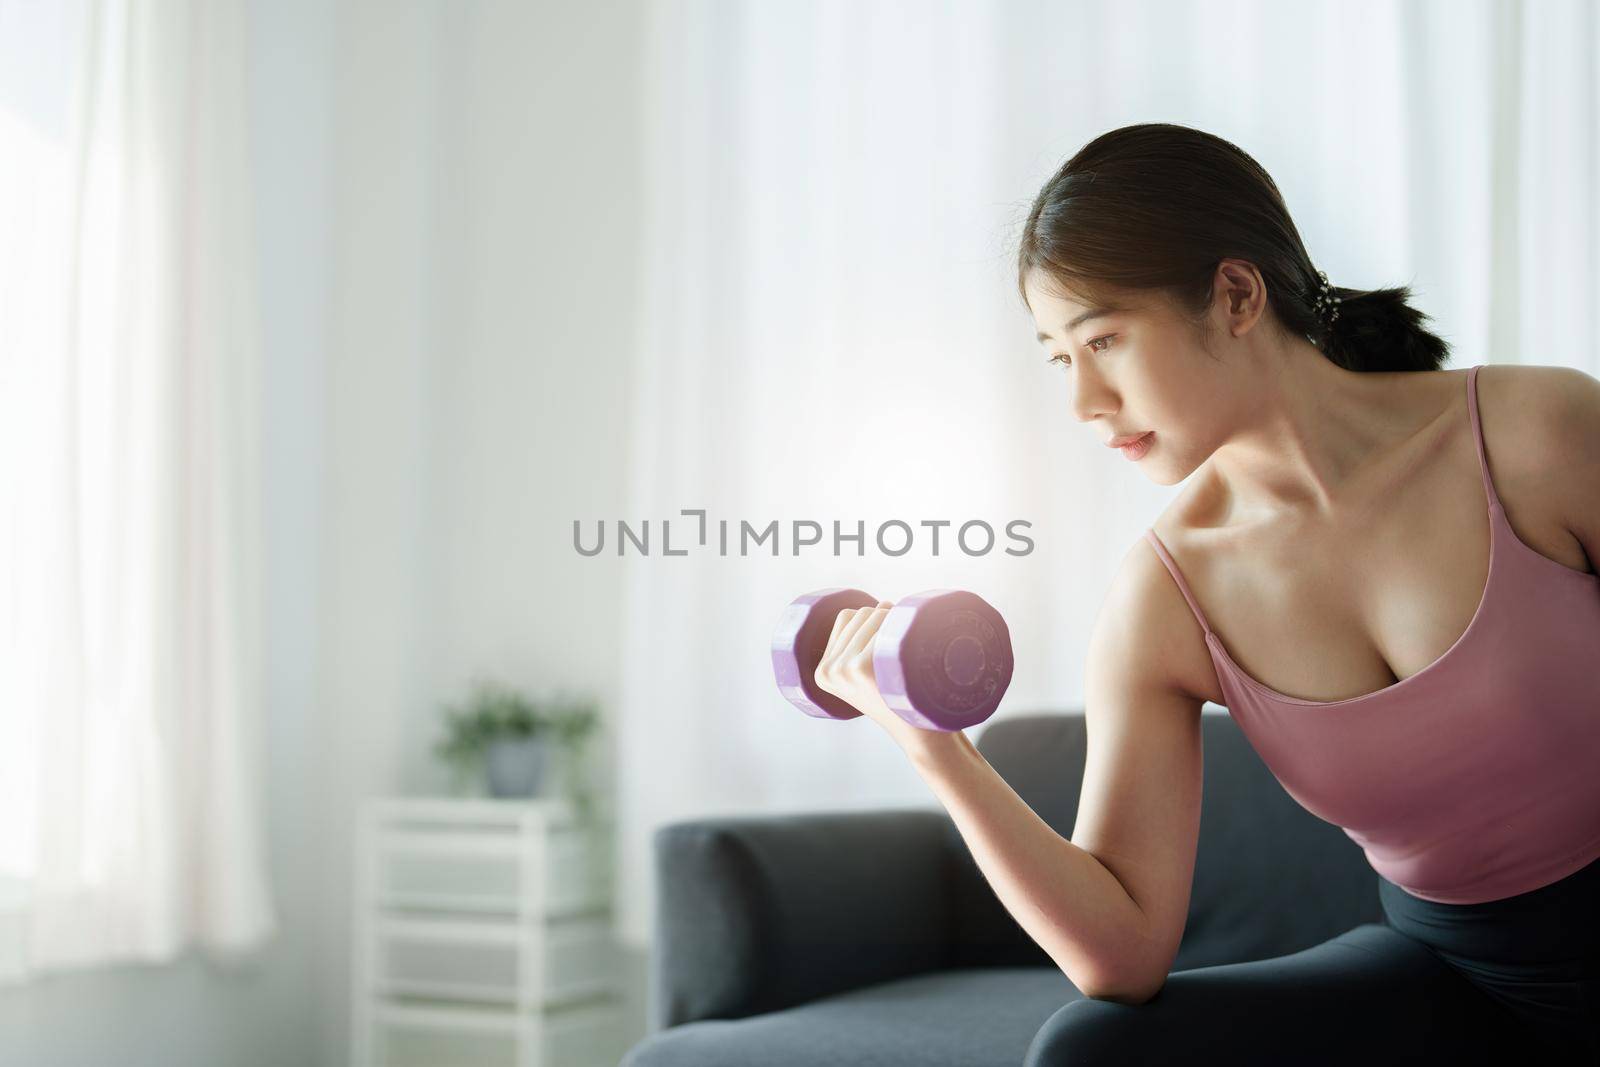 stress relief, , breathing exercises, meditation, portrait of Asian healthy woman lifting weights to strengthen her muscles after work. by Manastrong